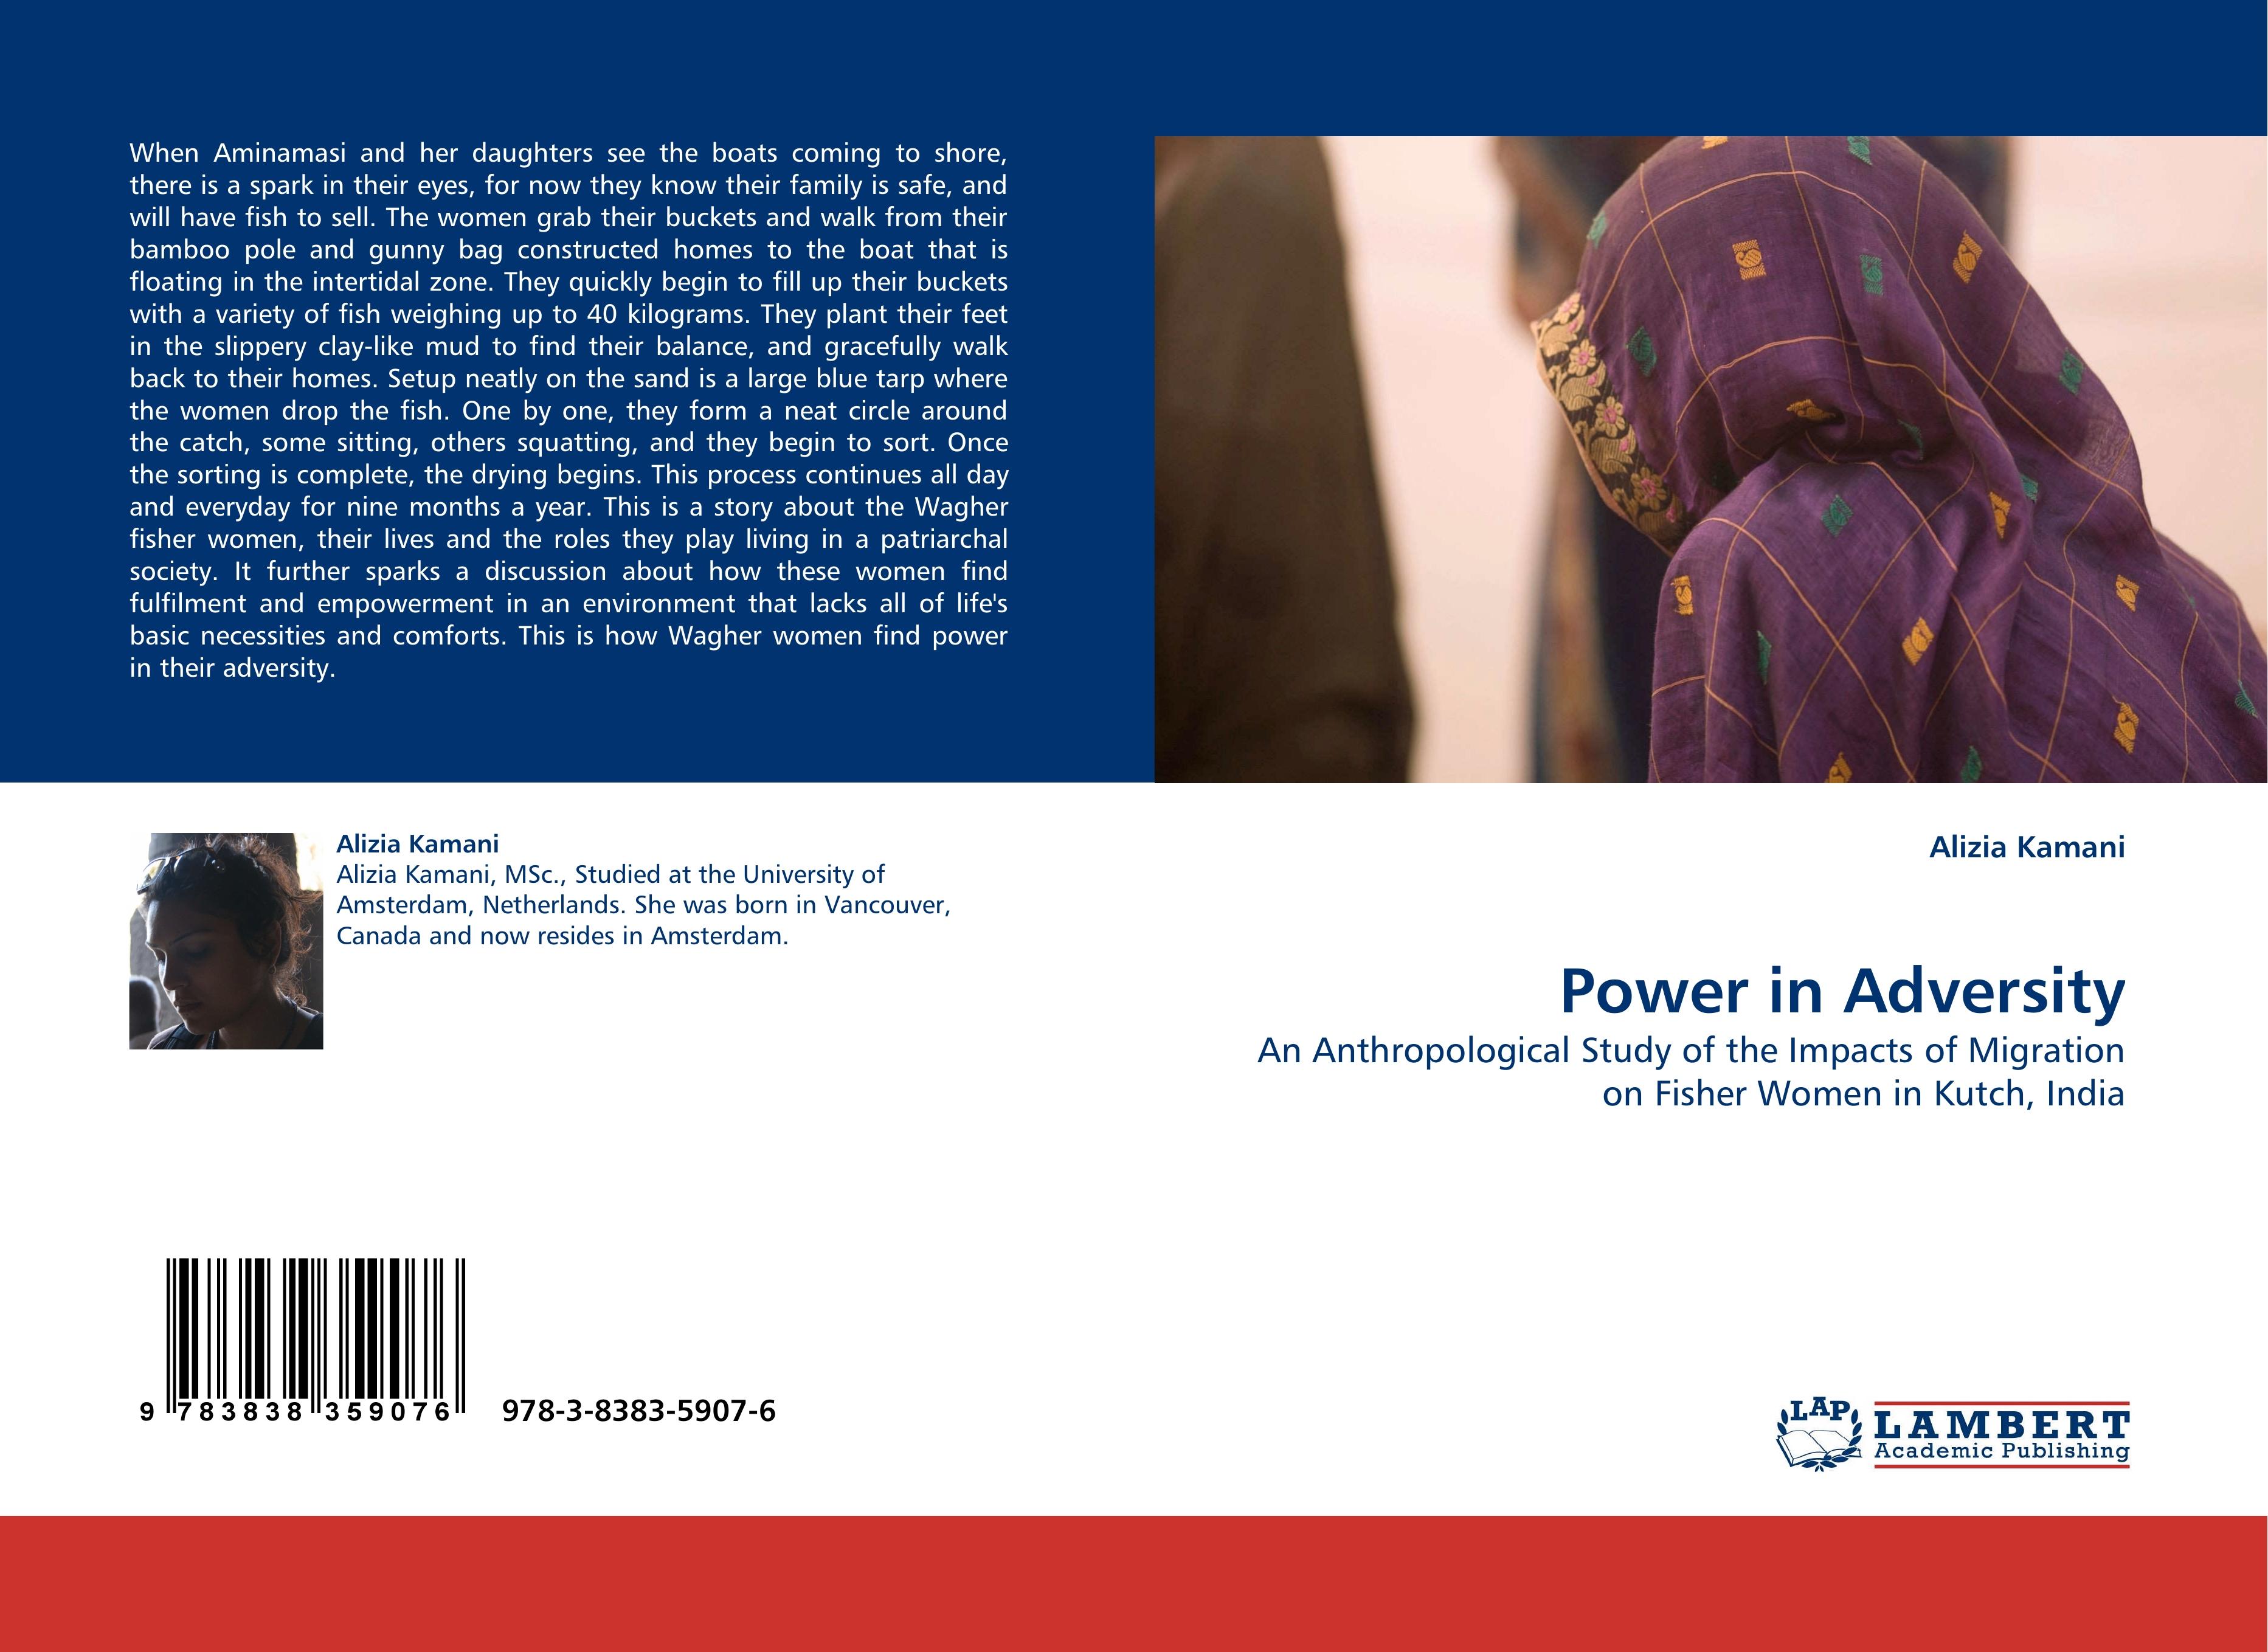 Power in Adversity / An Anthropological Study of the Impacts of Migration on Fisher Women in Kutch, India / Alizia Kamani / Taschenbuch / Paperback / 96 S. / Englisch / 2010 / EAN 9783838359076 - Kamani, Alizia